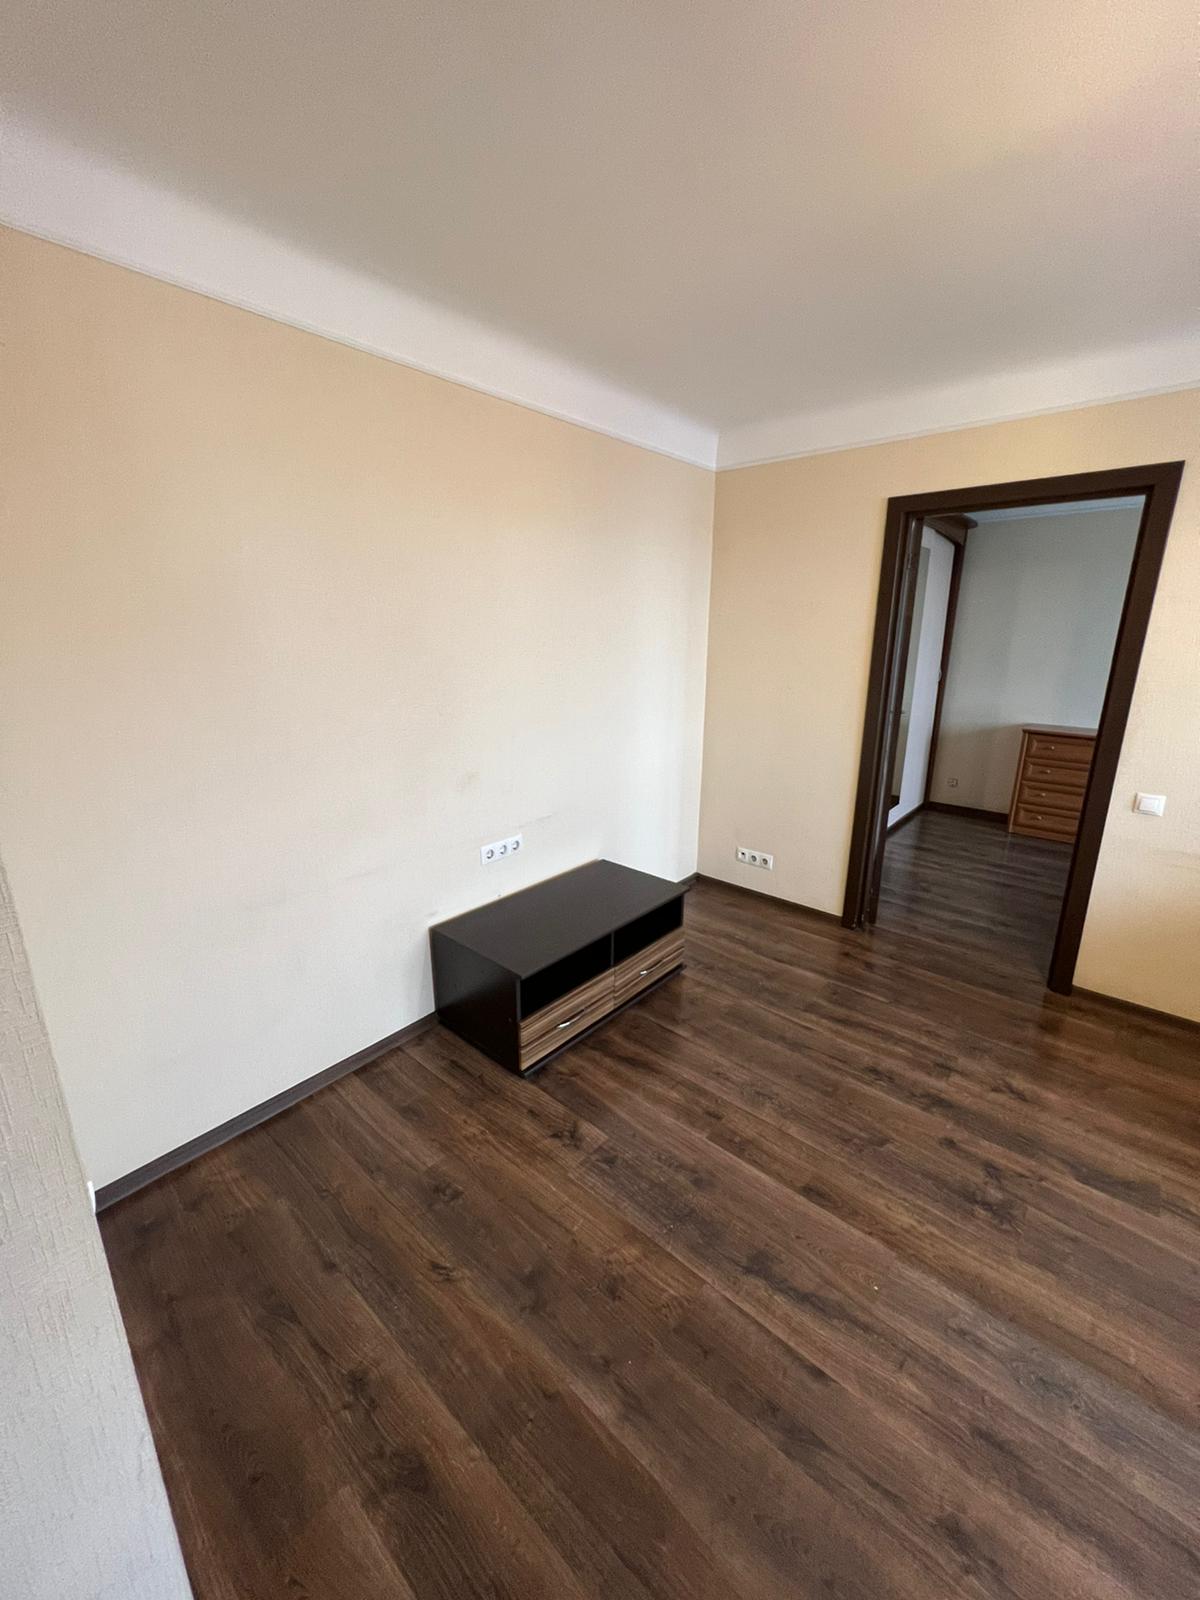 Apartment for rent, Hanzas street 8 - Image 1